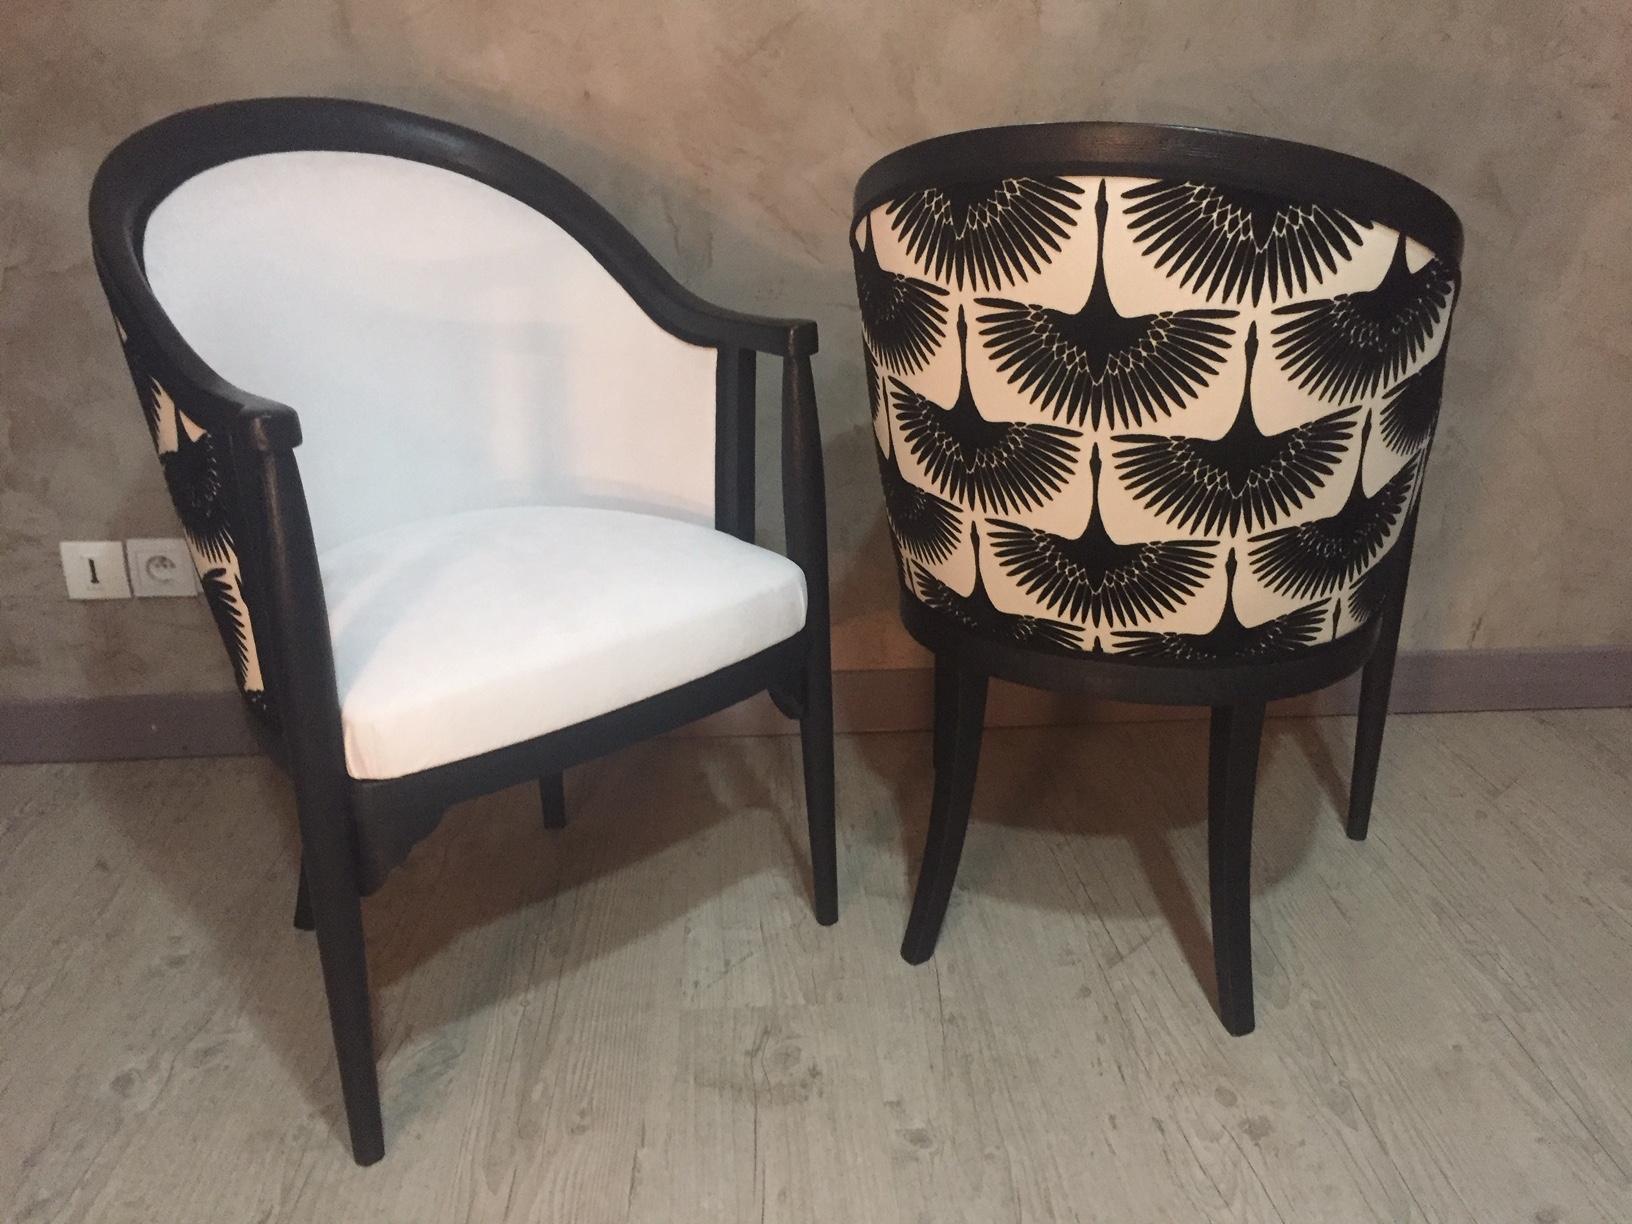 Exceptional 20th century French Art Deco entirely upholstered Armchair pair from the 1930s. The wood has been pickled and painted in black.
At the back, there is a beautiful fabric with black storks and the seating is a aquaclean white fabric. It